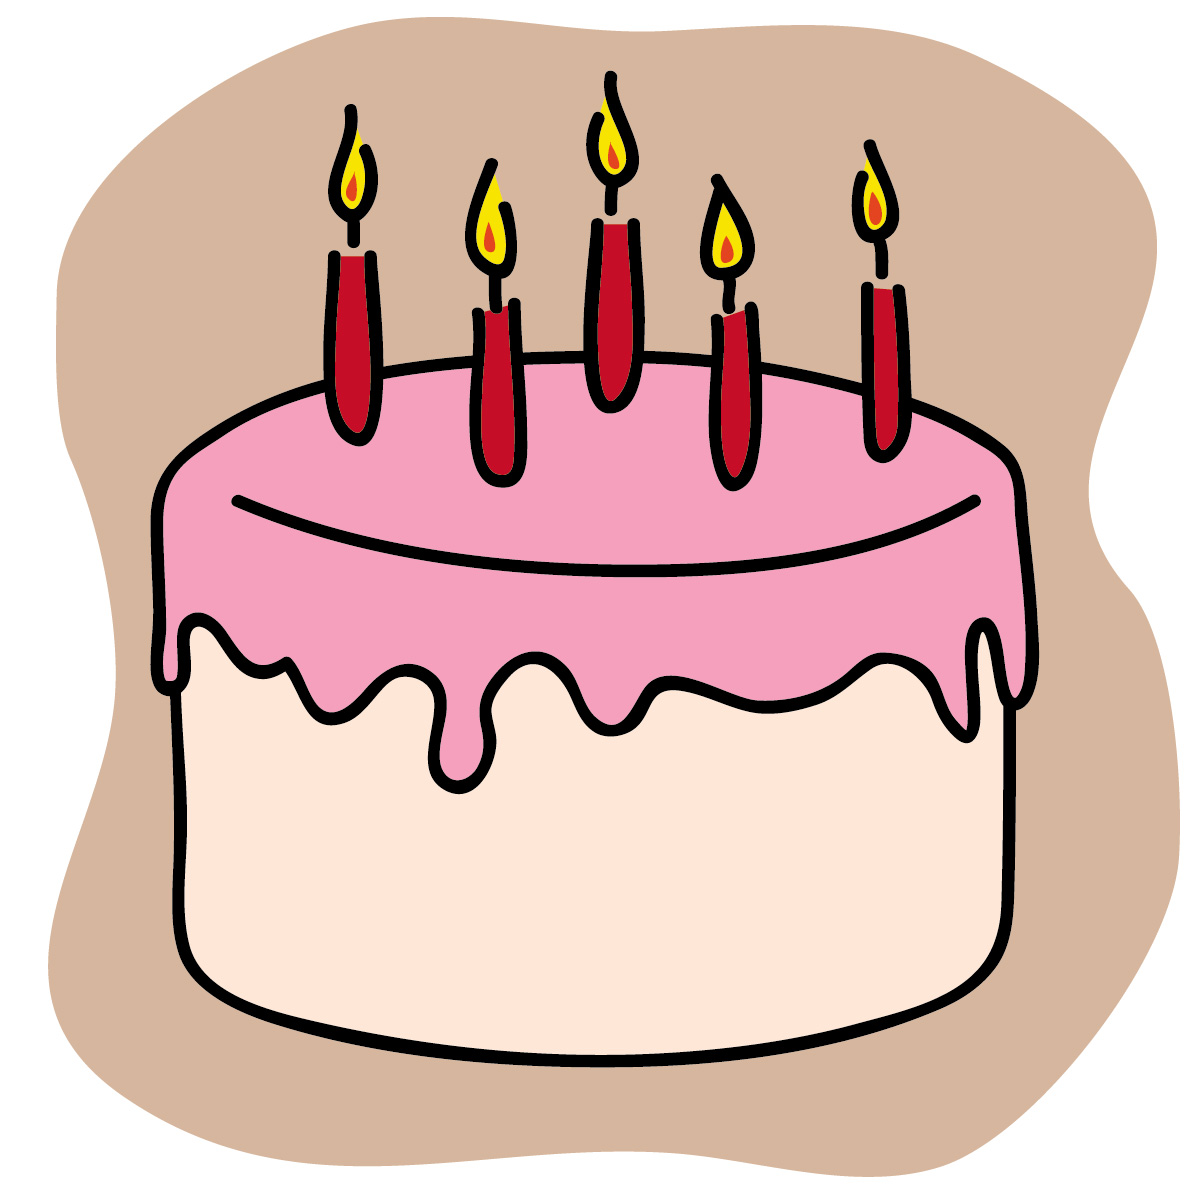 There Is 19 Boy Candle Birthday Cake Free Cliparts All Used For Free